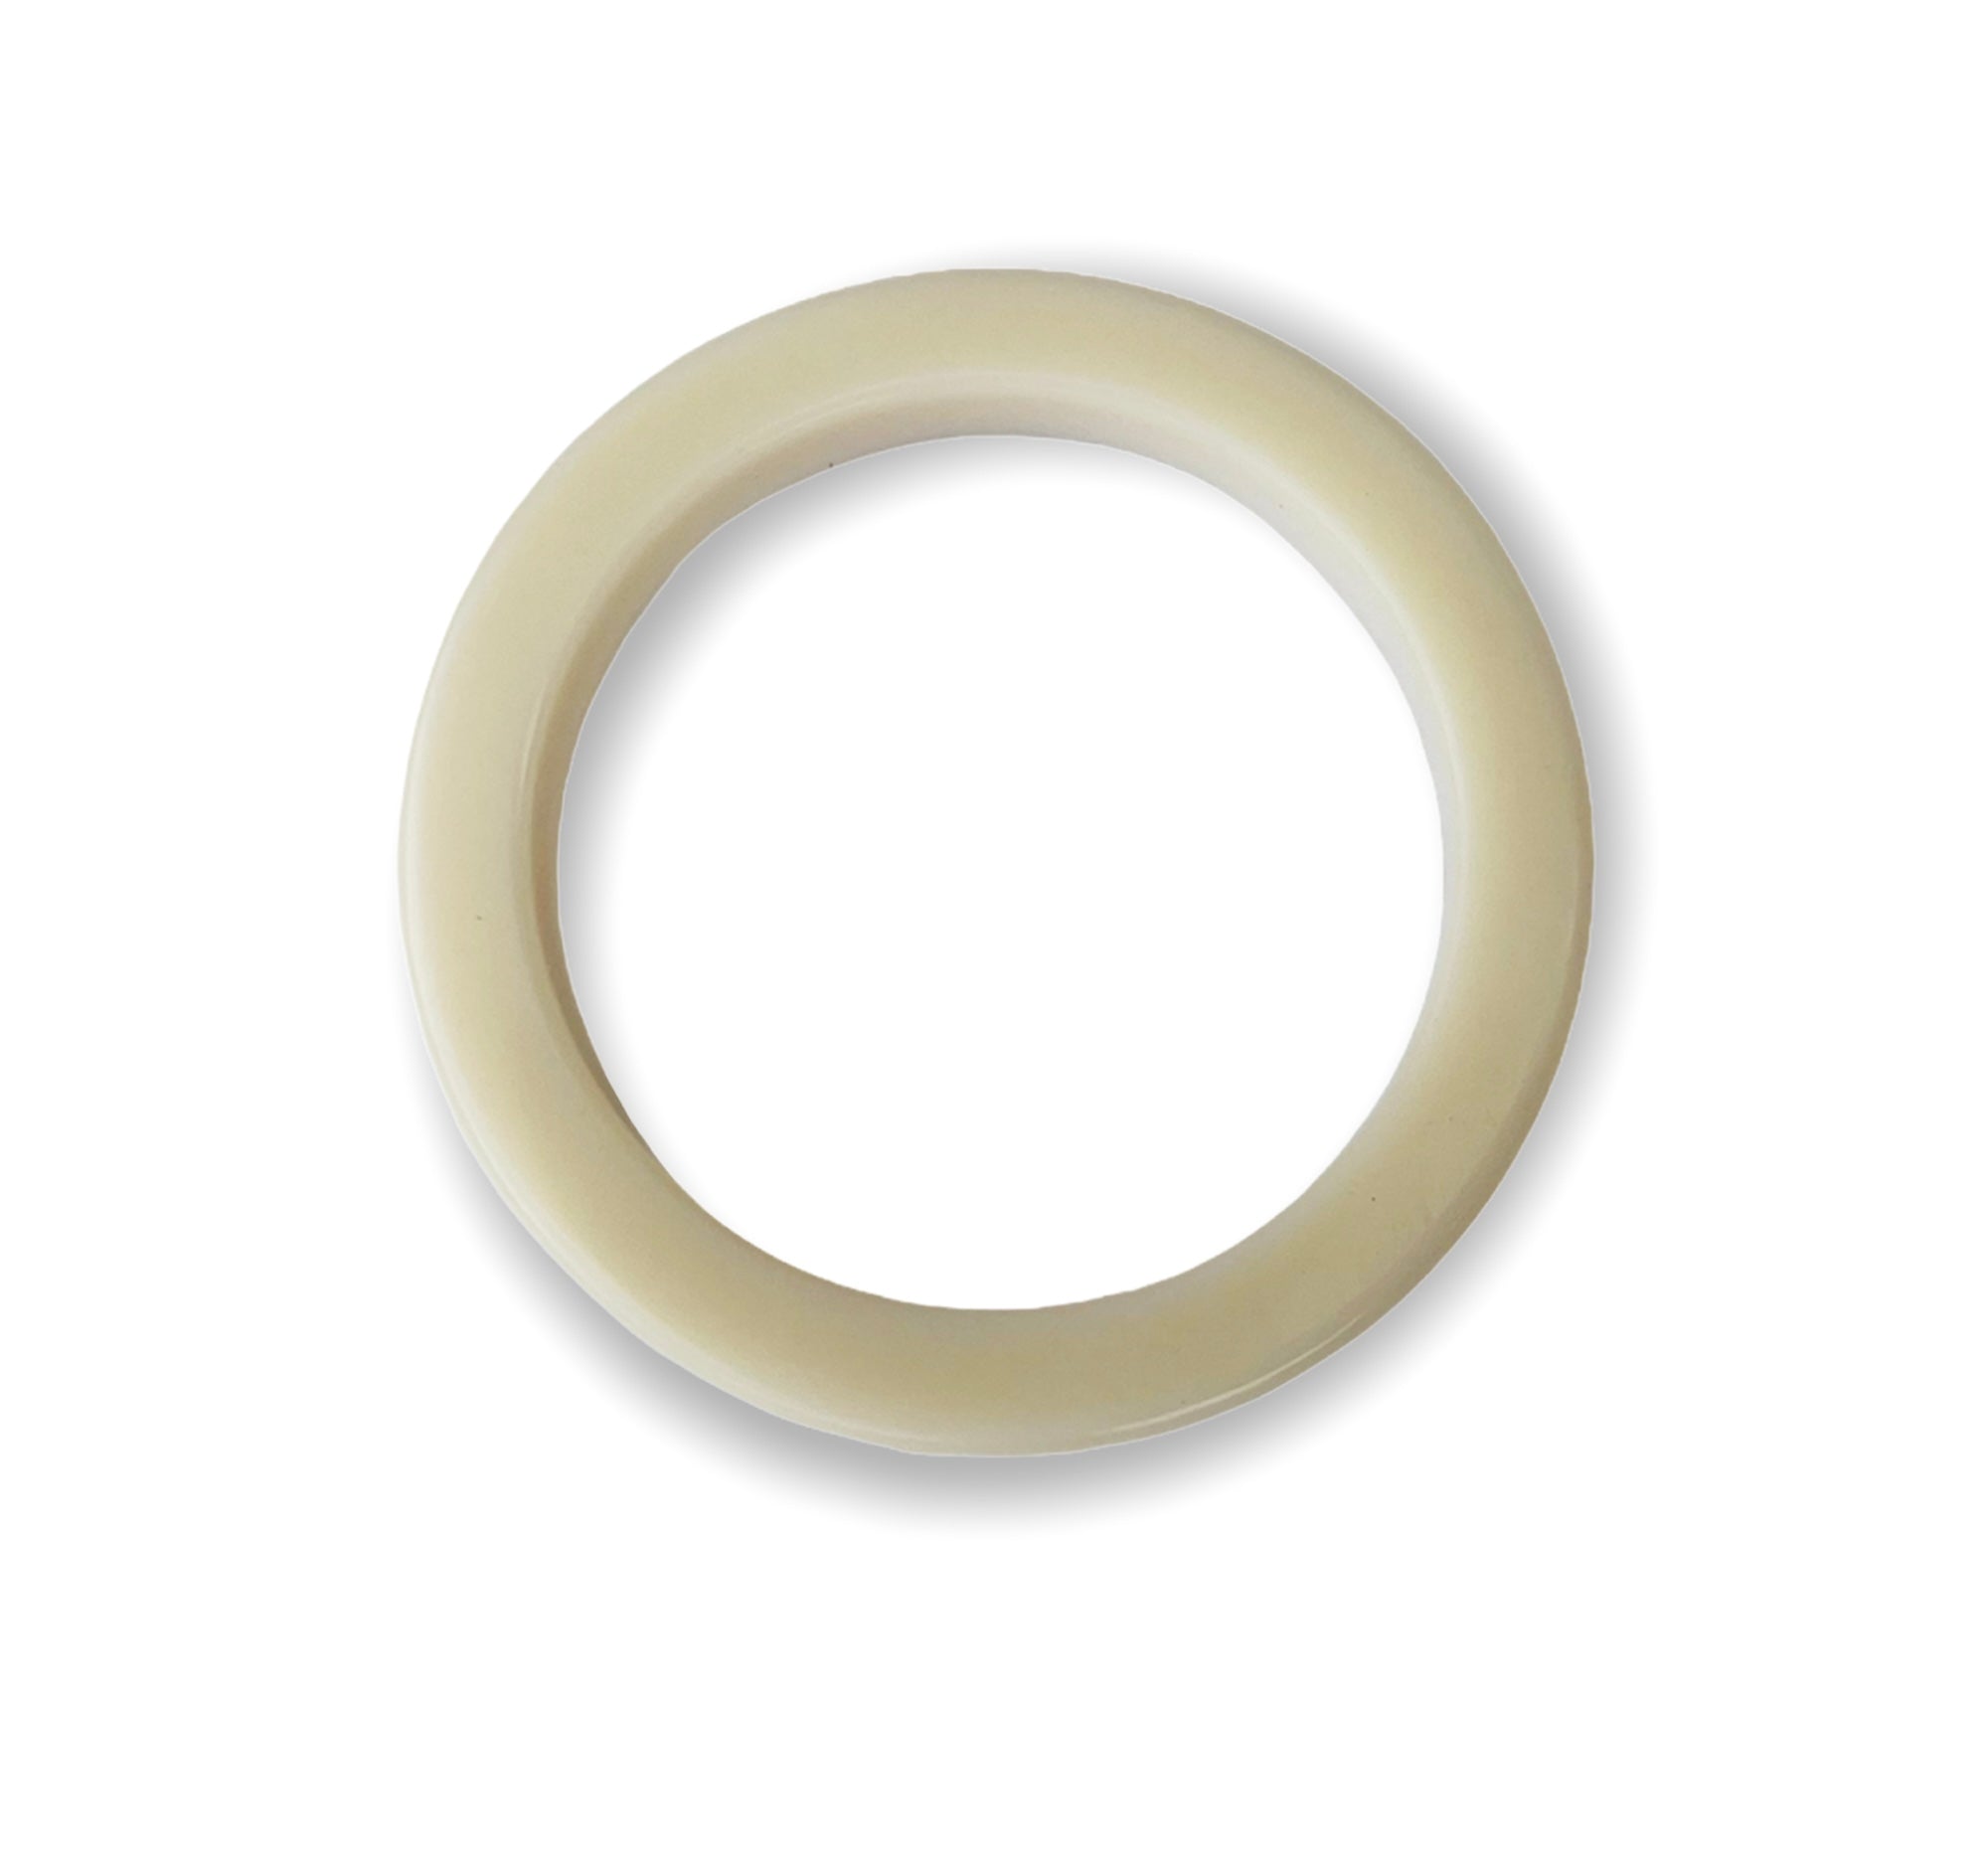 54mm Steam Ring - BES840/860/870 (BPBES86002.6)  OEM part  Group seal for Breville home machines  Suitable for BES840, 860 and 870  Specifications:   external ø 65 mm internal ø 49 mm thickness 6.8 mm thickness with lip 10 mm for units 54 mm in white/yellow silicone Suitable for Breville BES870, BES878, BES880 SKU: SP0001474 (BPBES86002.6)